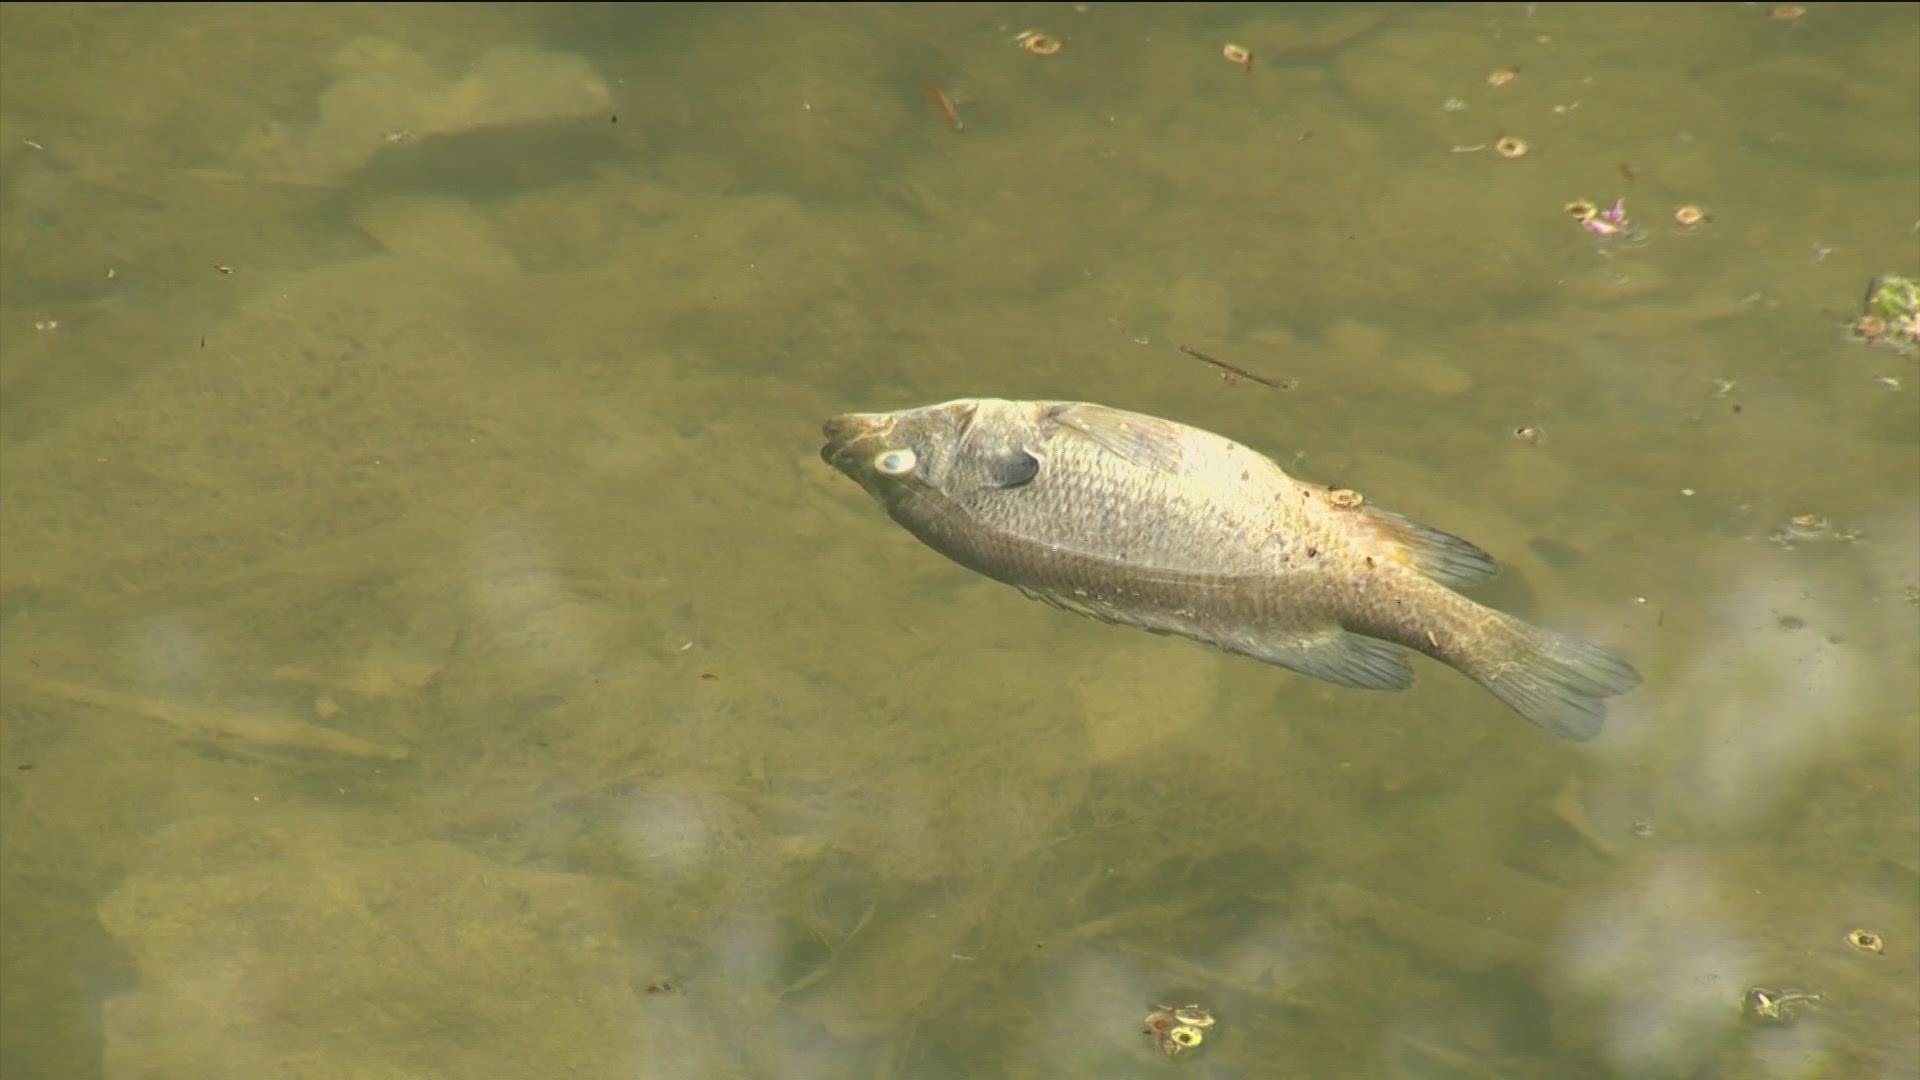 Austin's Watershed Protection Department said when crews tried to dechlorinate the water after a watermain break near the creek, they already found the dead fish.